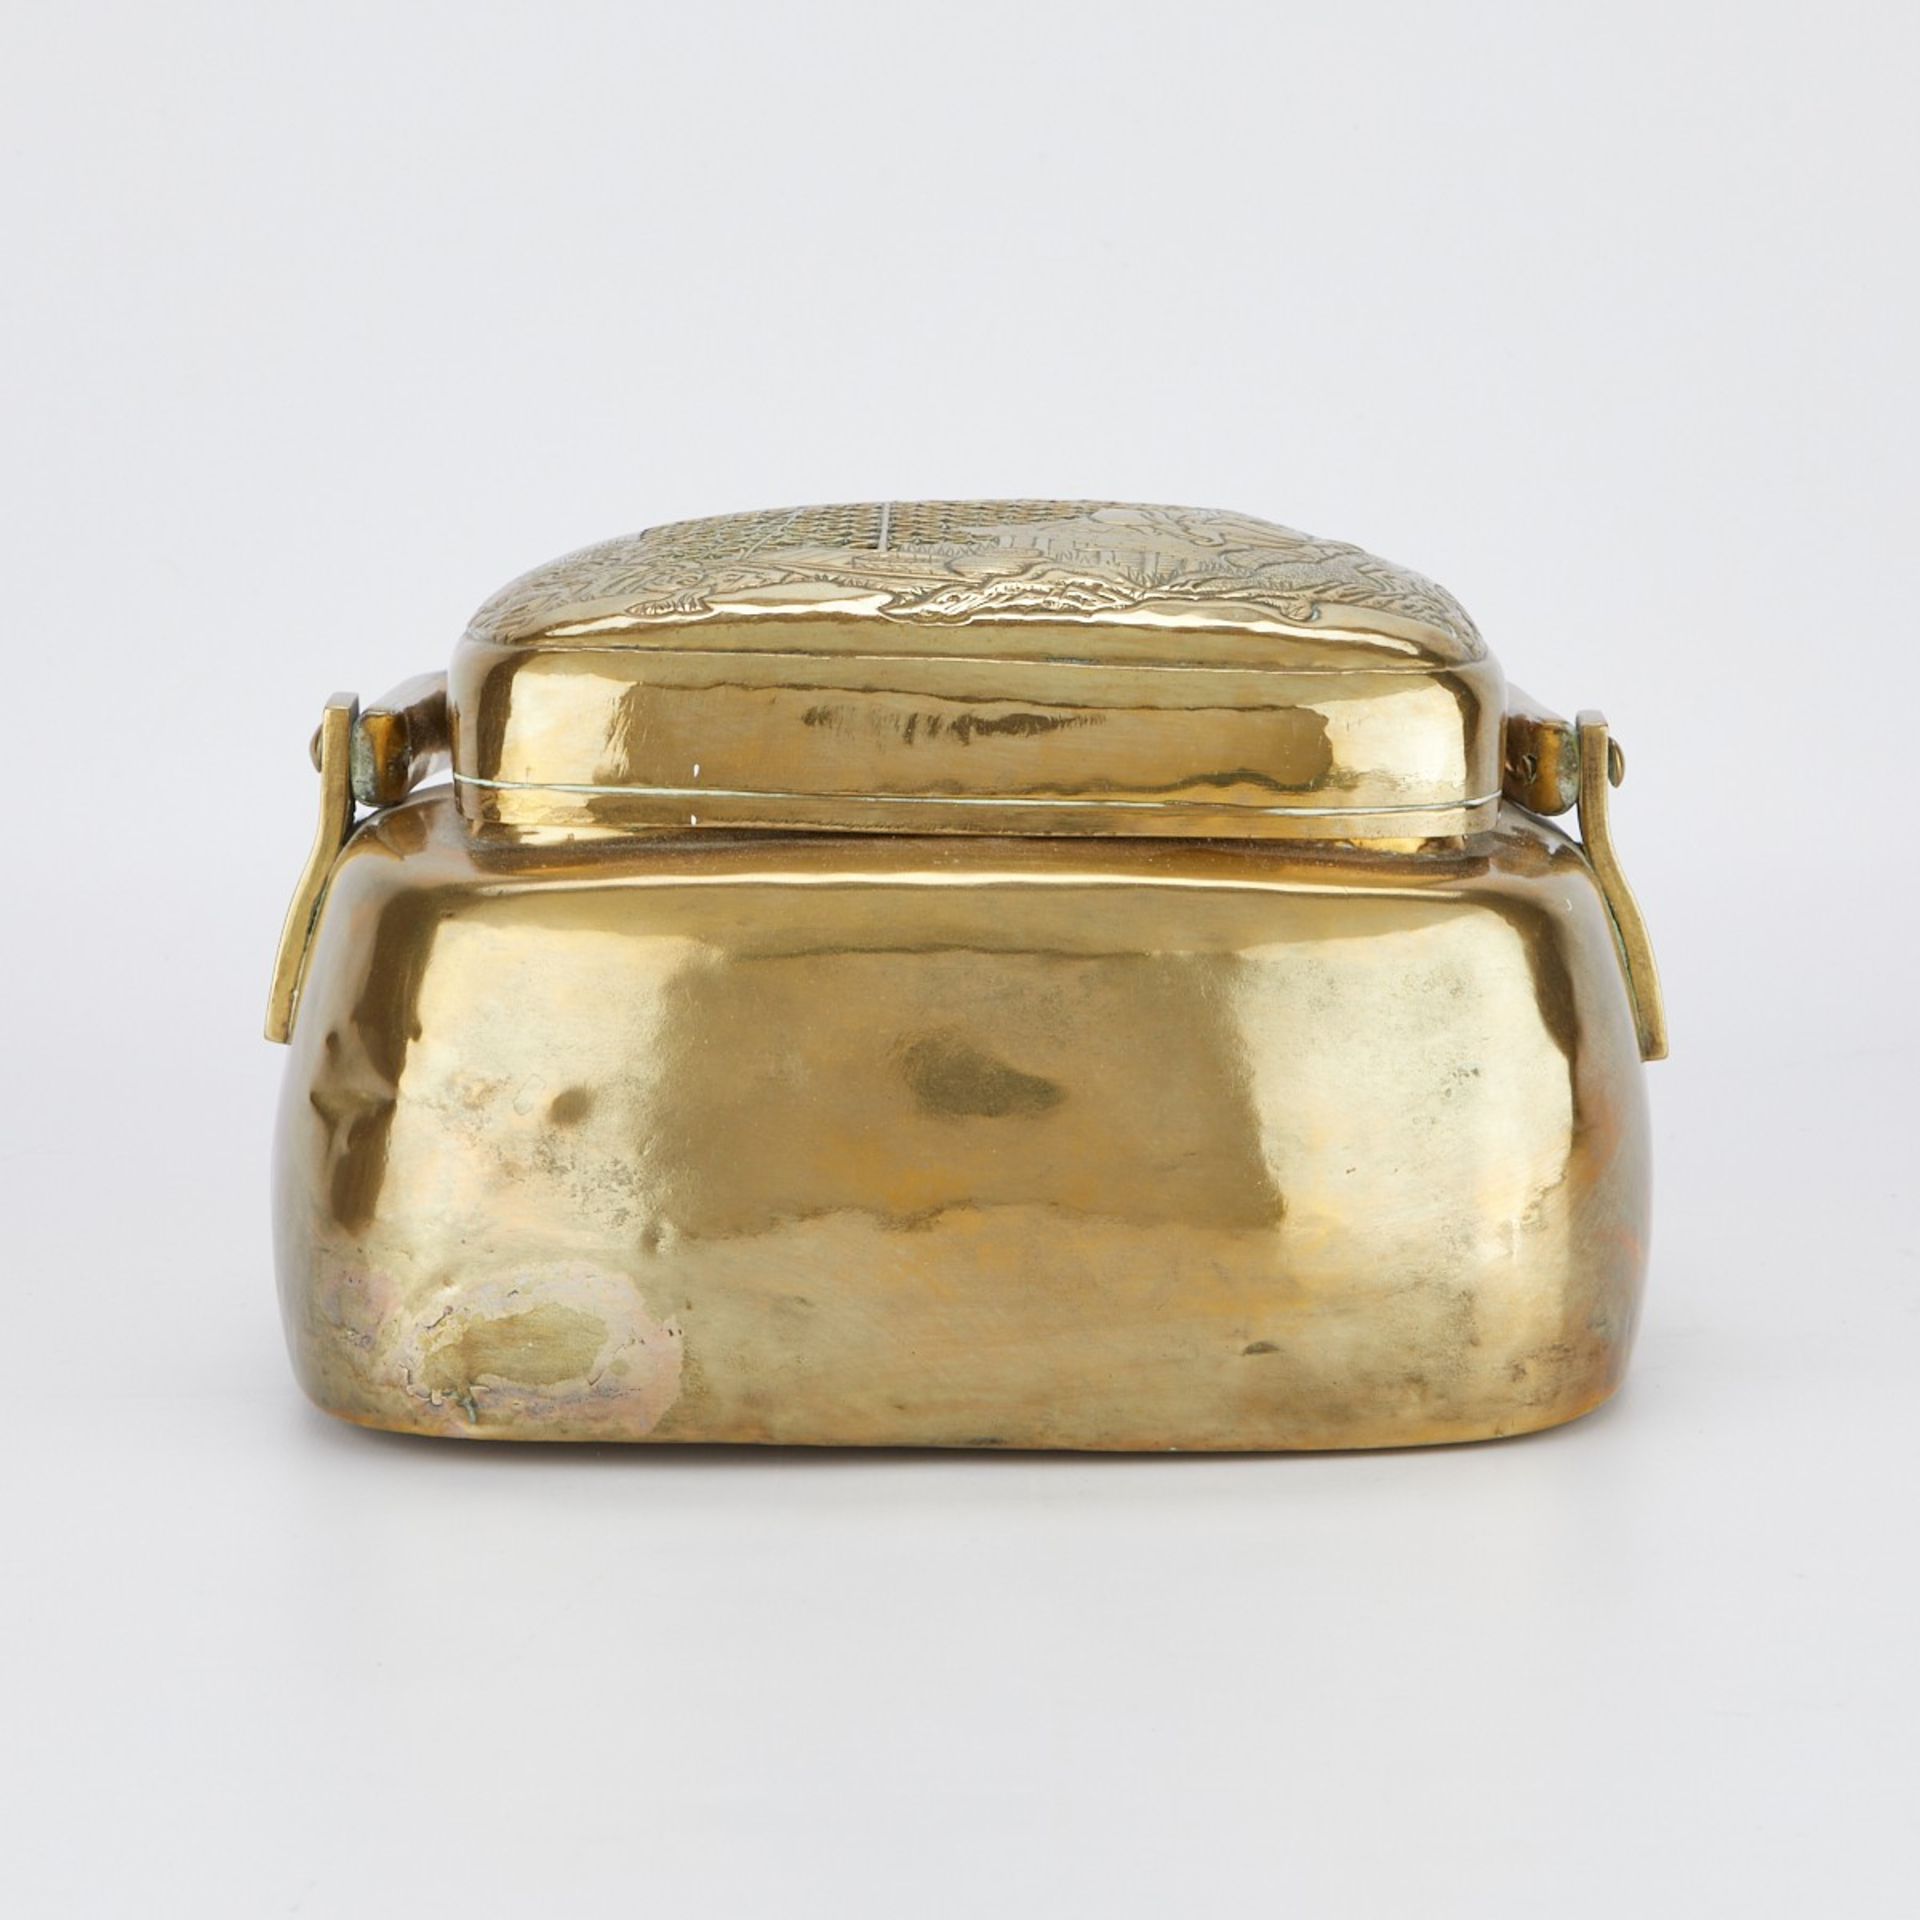 Lrg Chinese Qing Brass Hand Foot Warmer - Image 3 of 8